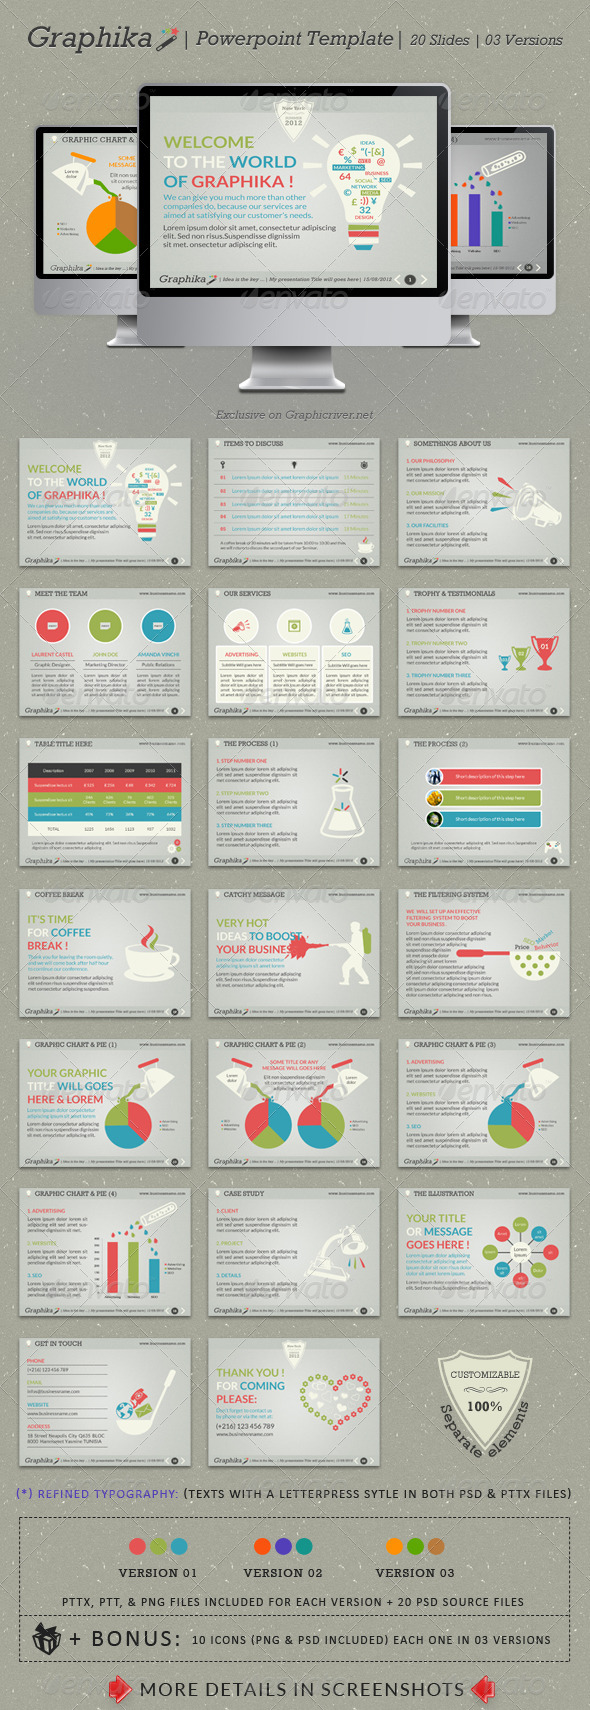 Graphika PowerPoint Template